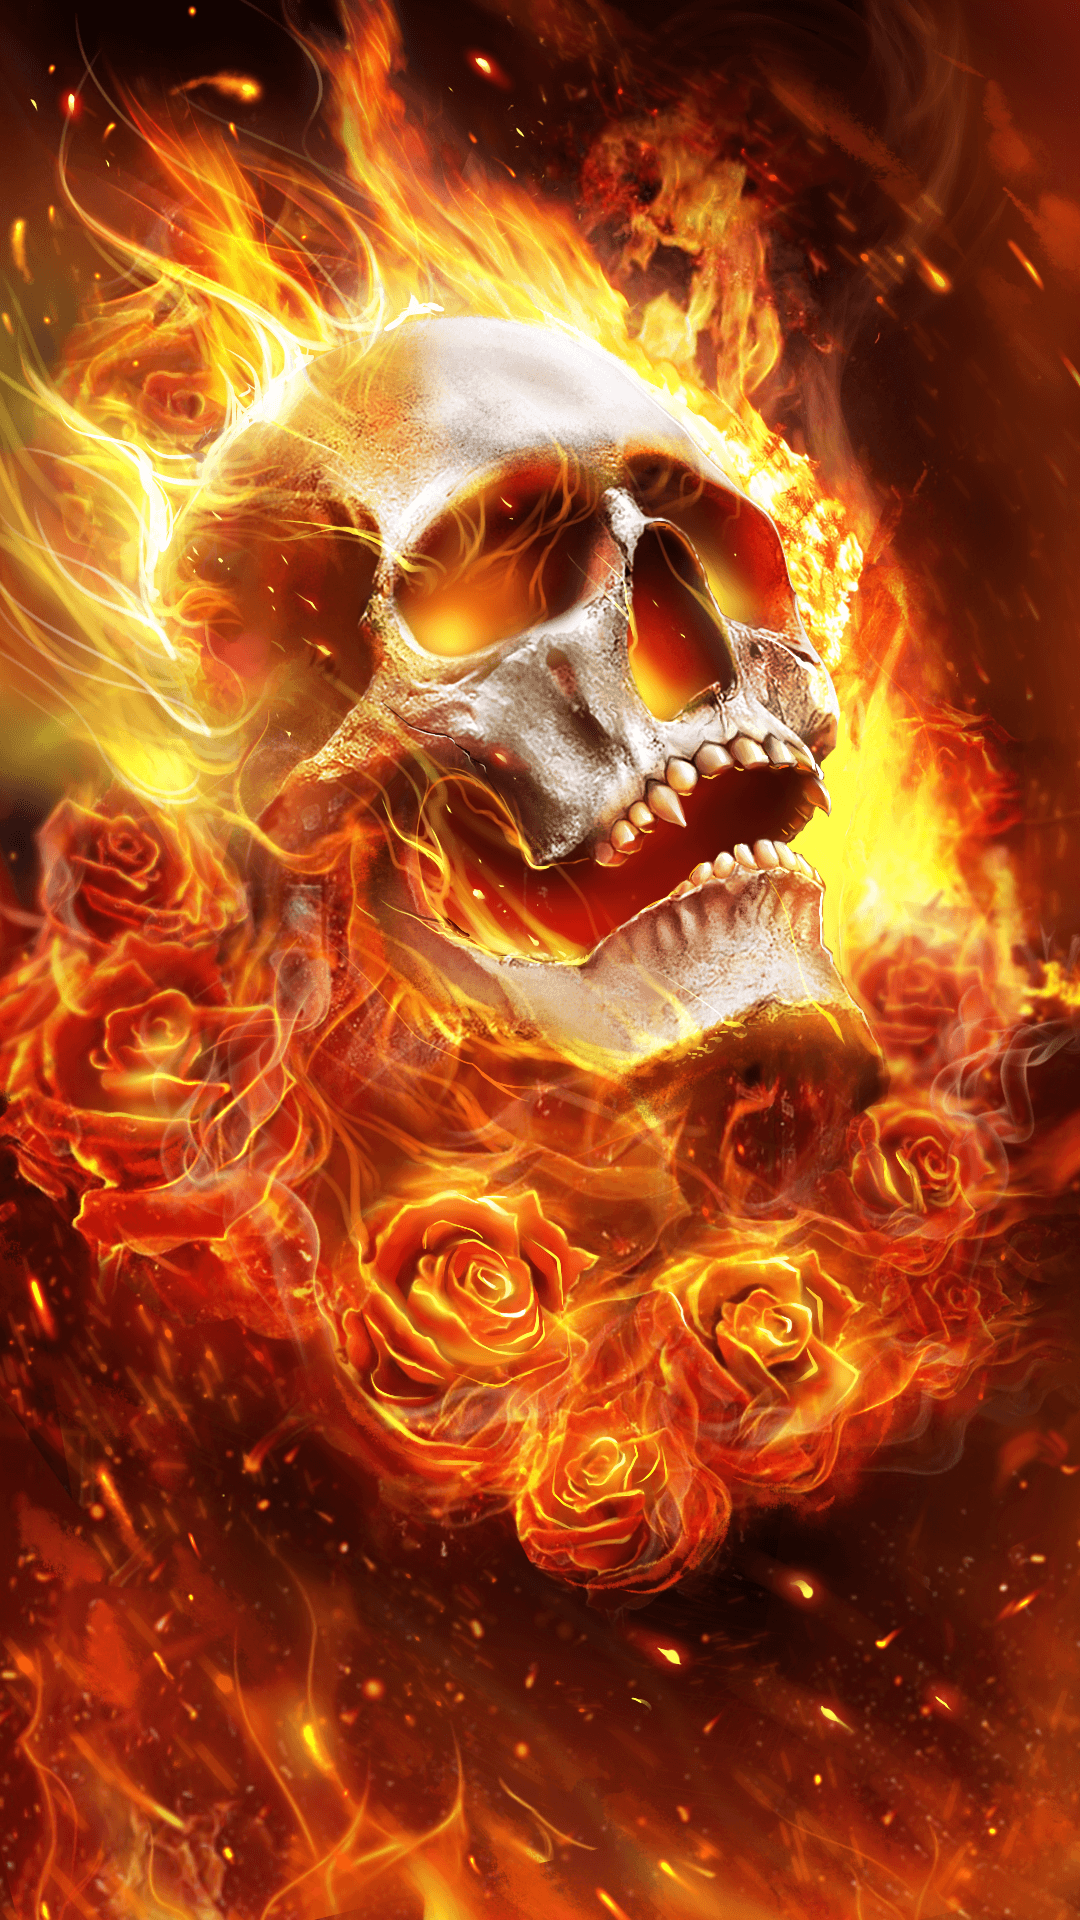 Flame skull with roses! Beautiful live wallpaper. Android